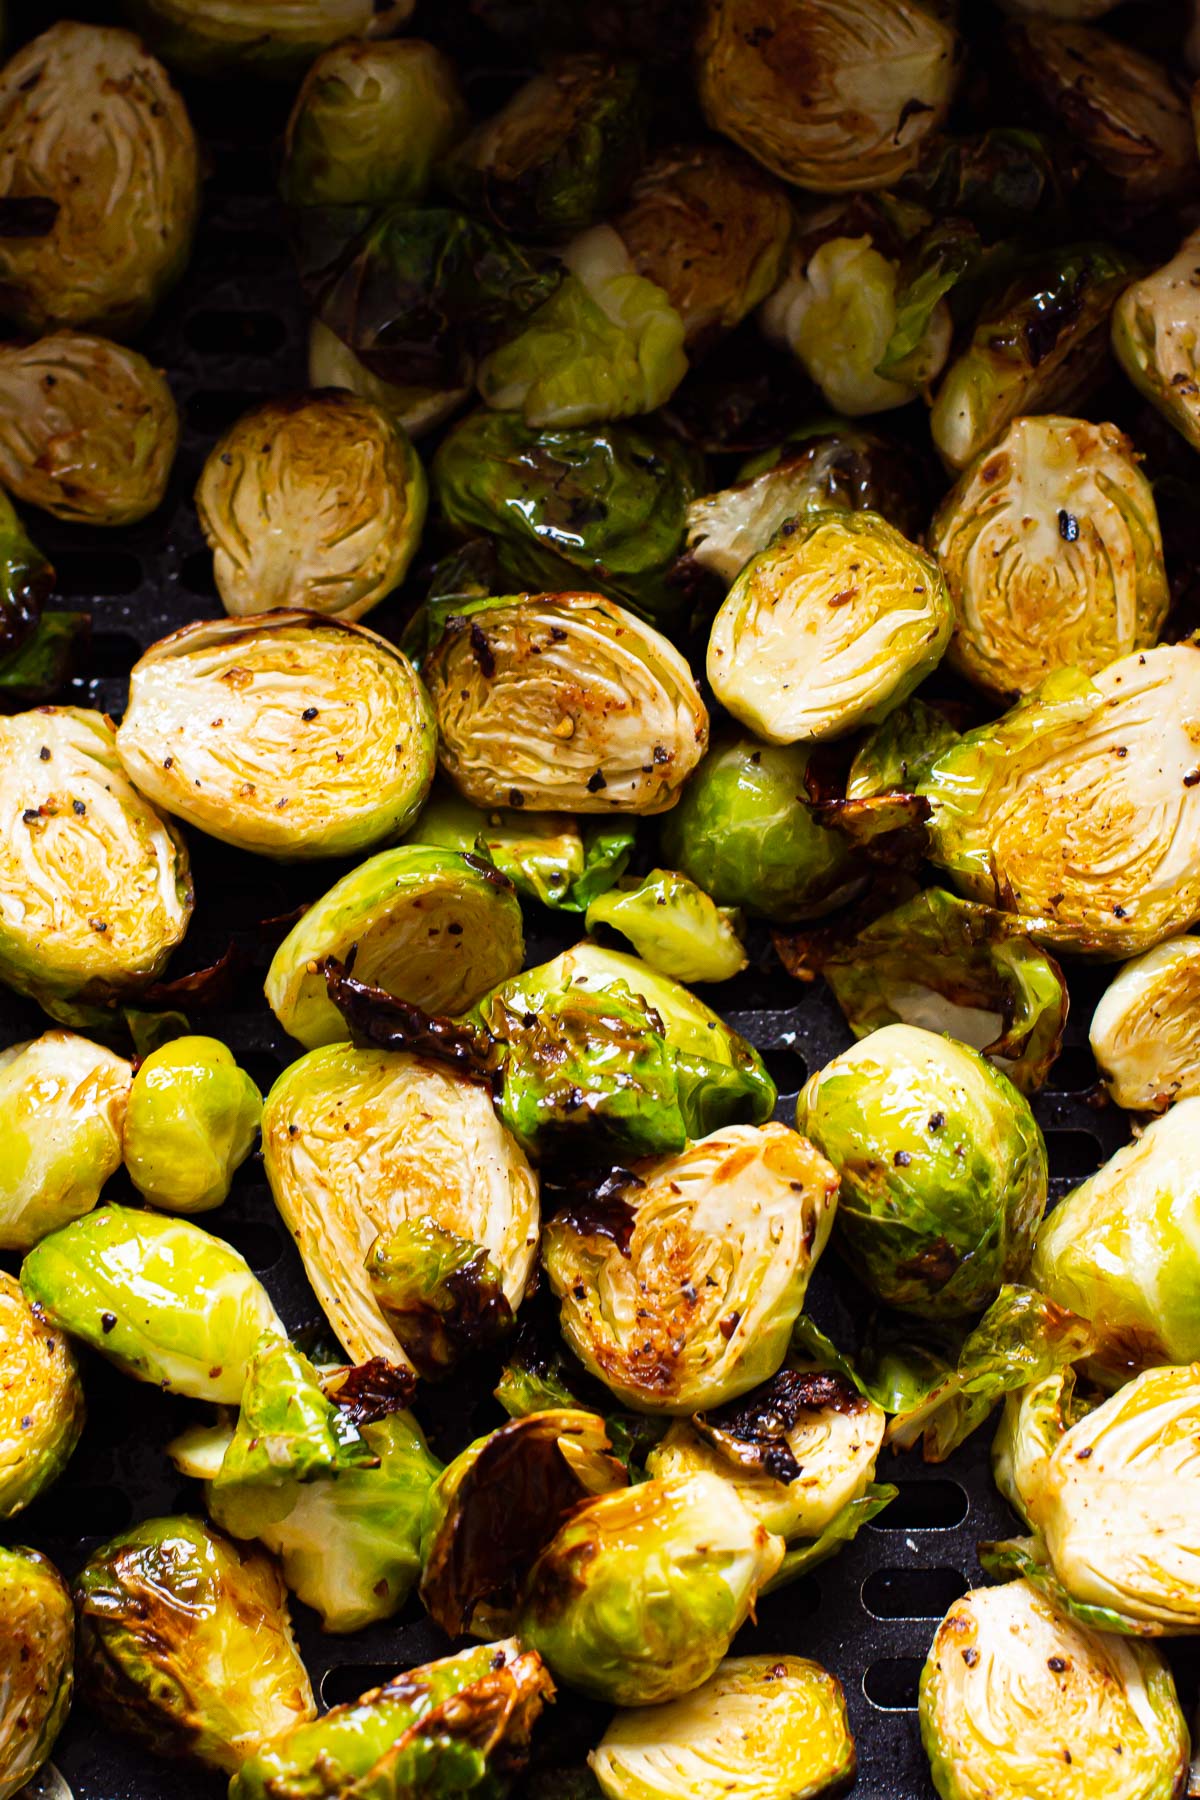 Crispy air fryer brussels sprouts showing texture.